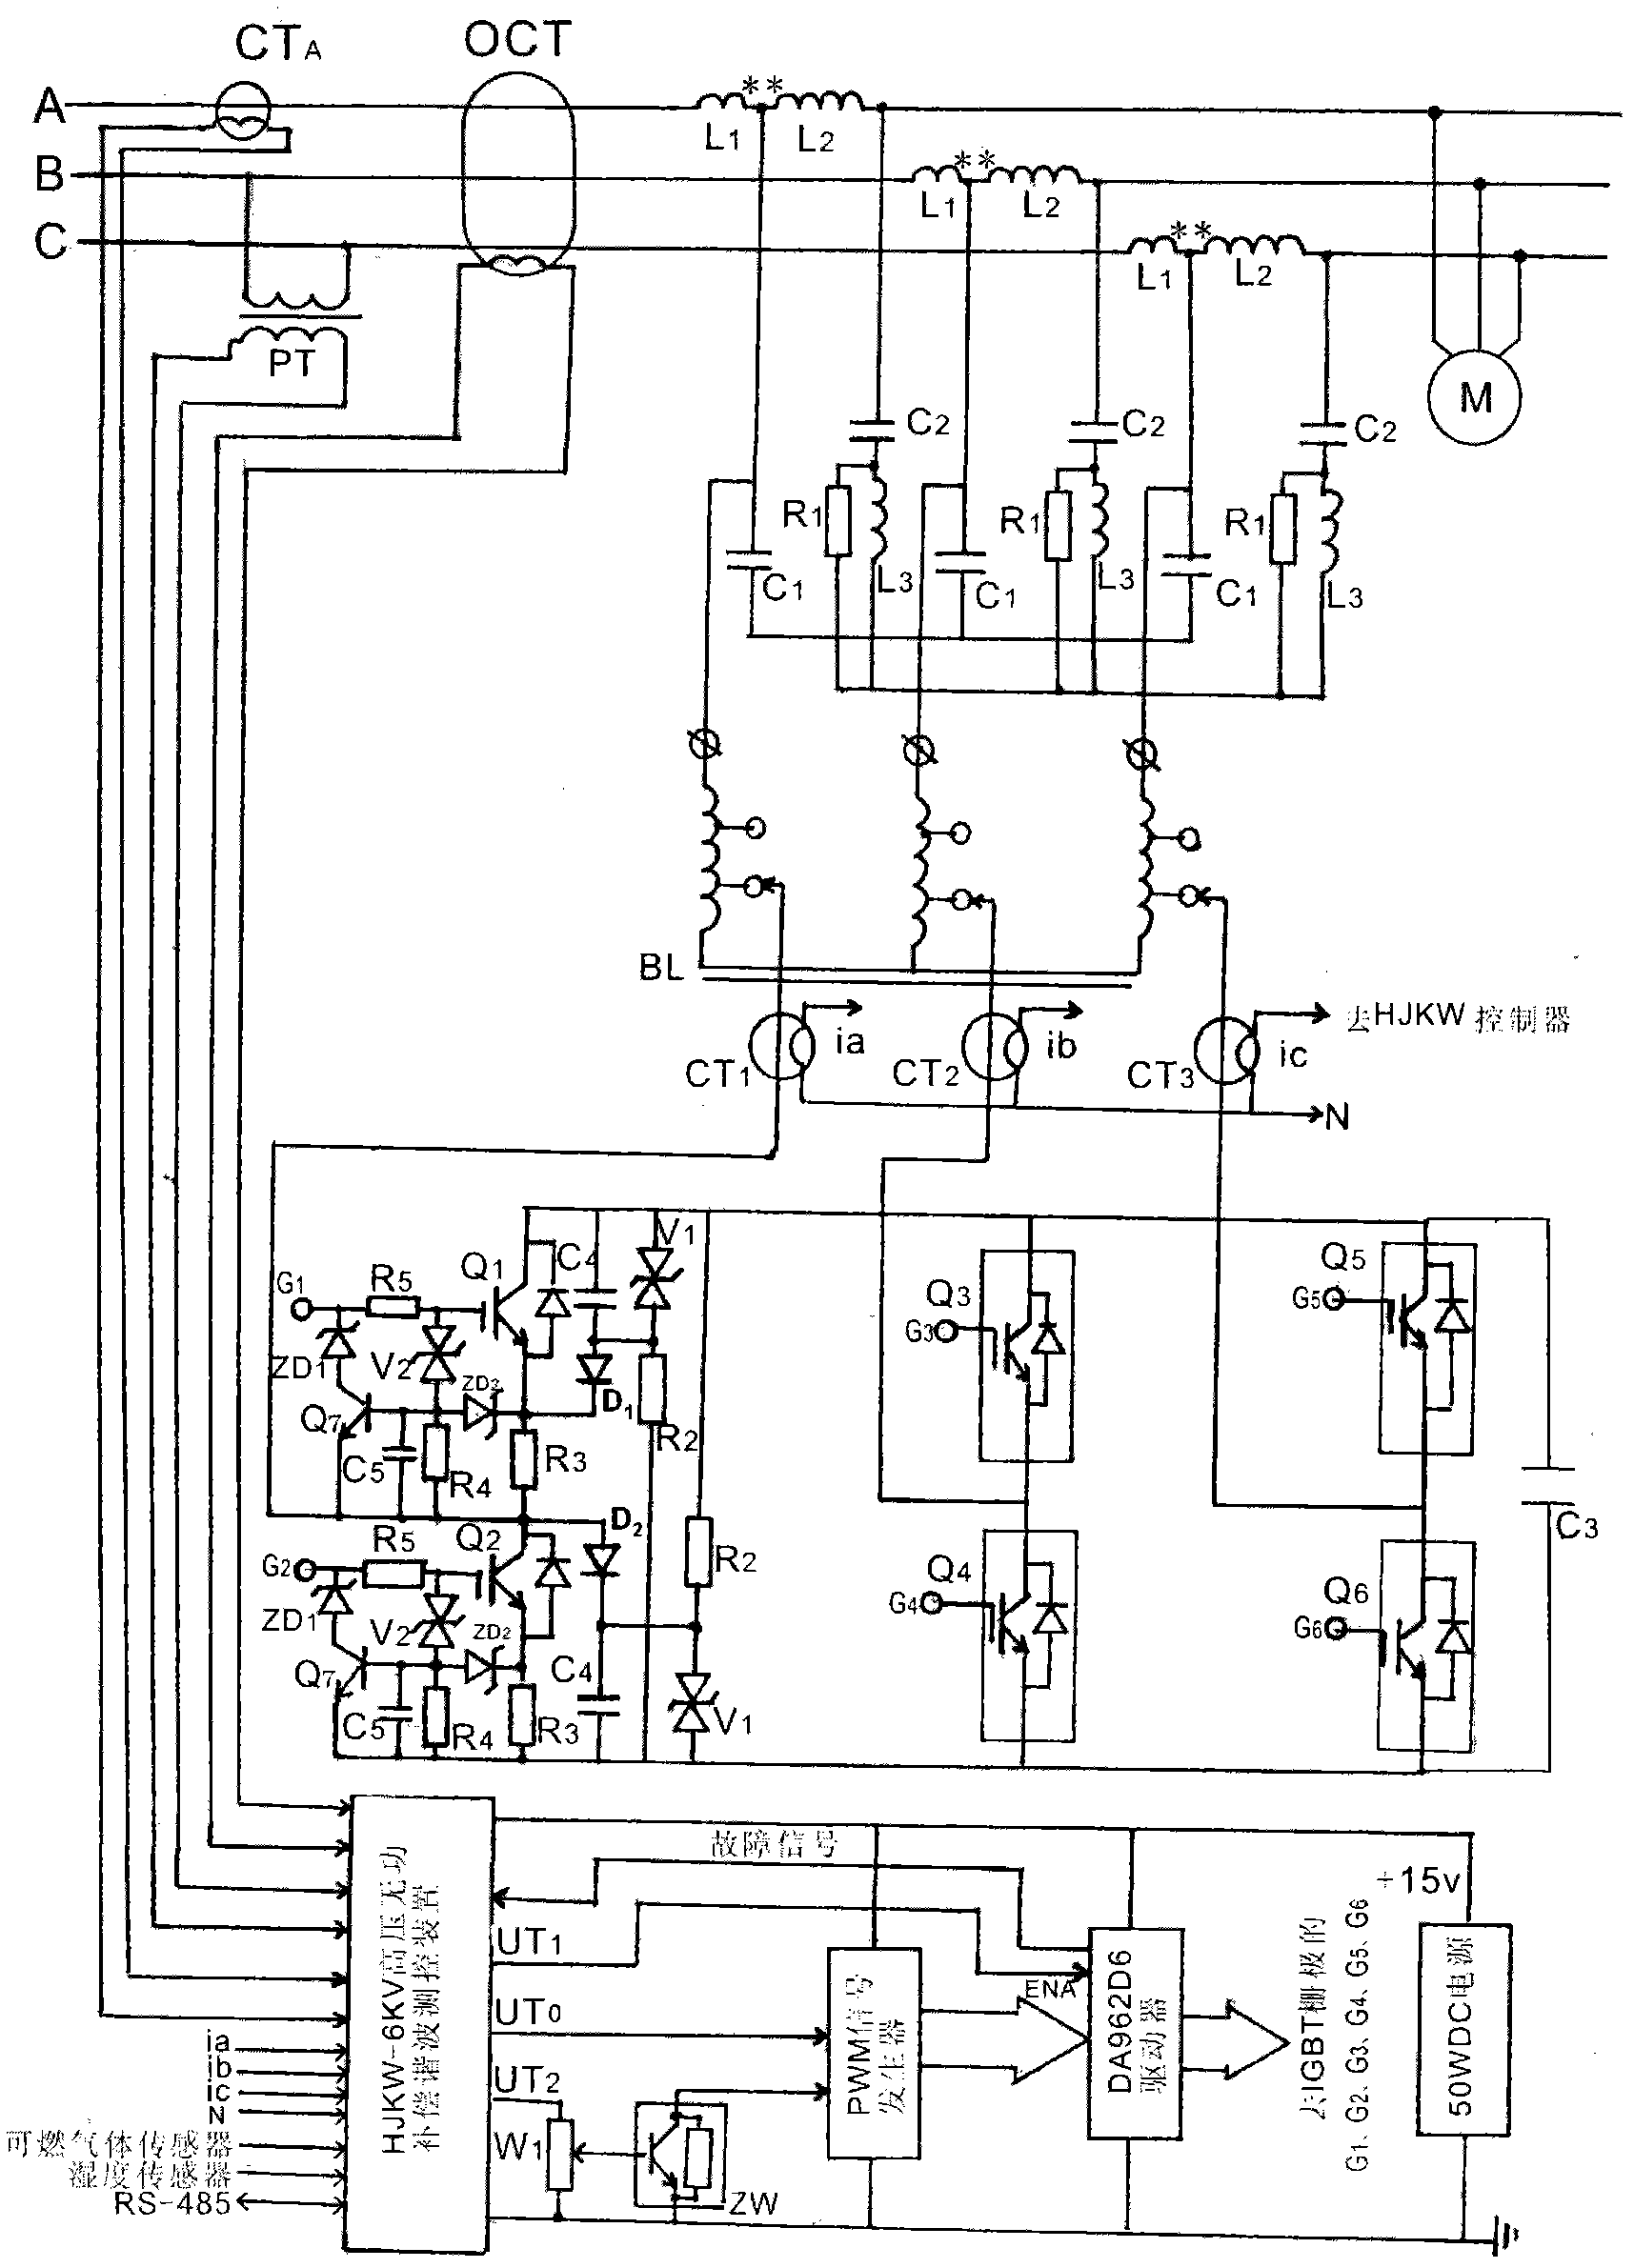 High-voltage dynamic filtering power-saving device for mine